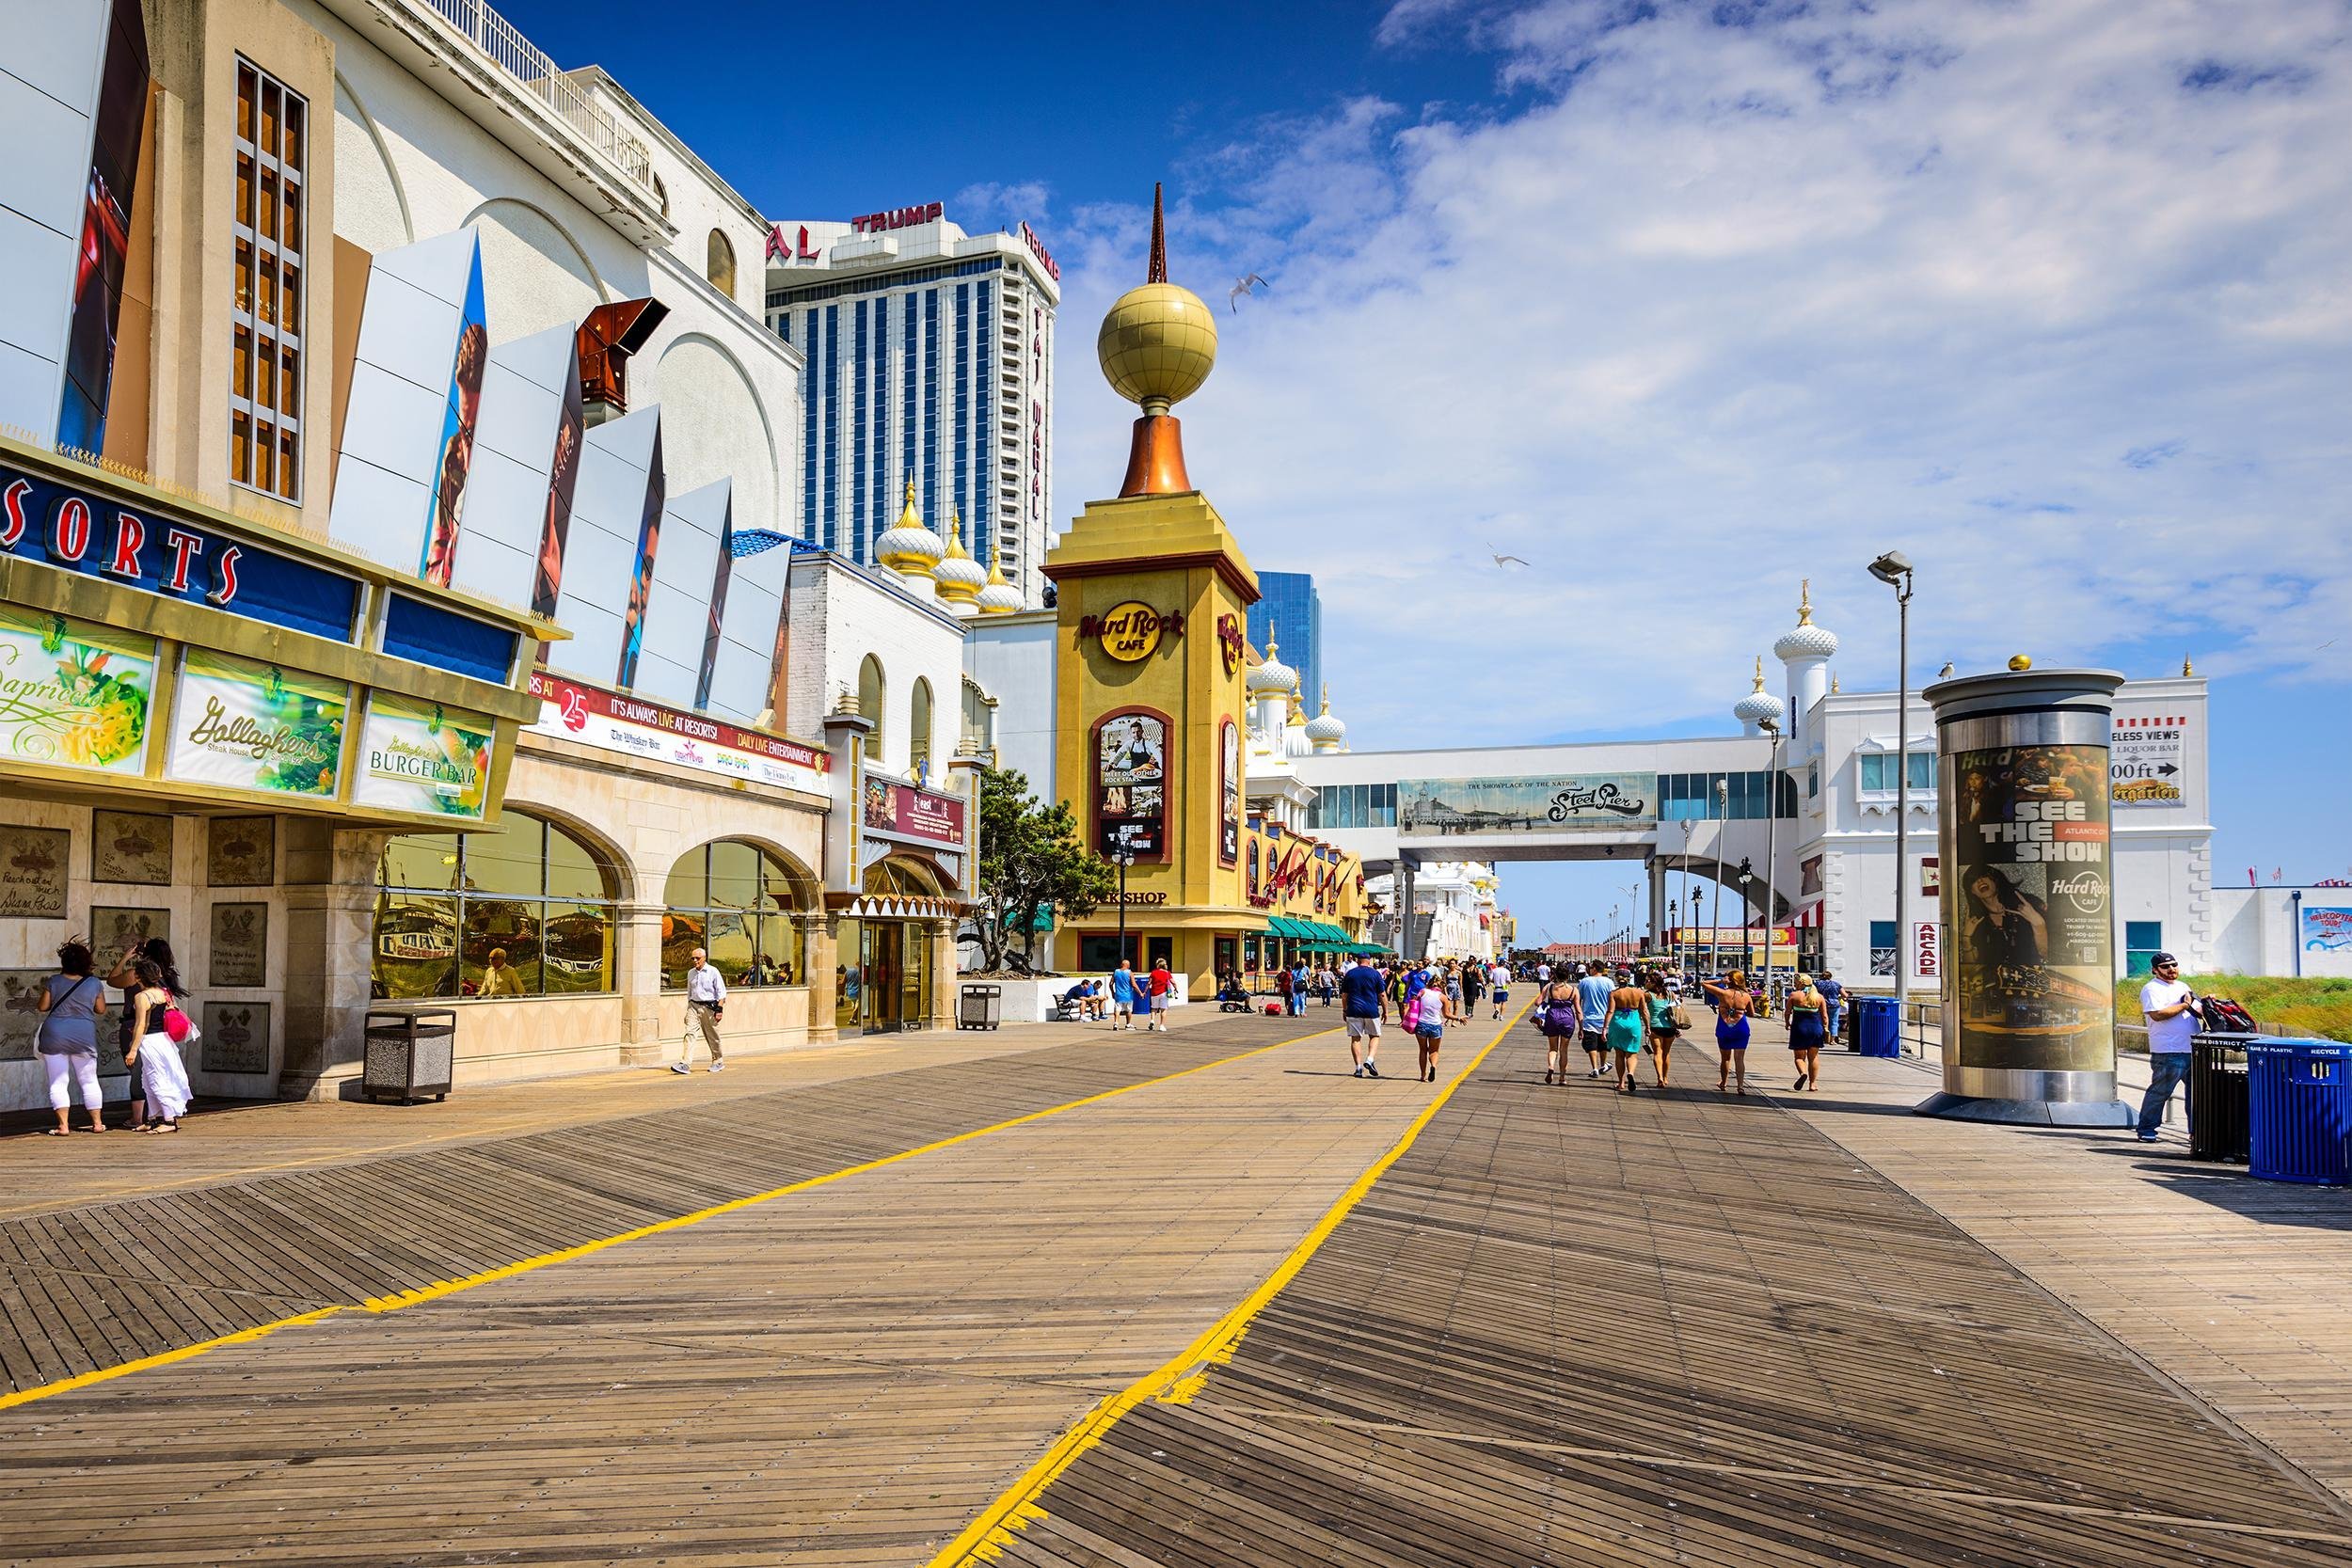 <p>Atlantic City lacks the glamour of Las Vegas, but boy, does it have history. The <a href="https://www.atlanticcitynj.com/">iconic boardwalk</a> was a first in the United States; this is the birthplace of salt water taffy; and the city was known as "the world's playground" during the two decades before World War II. Sign up for the casinos' loyalty programs; even if you don't gamble, they offer benefits off the floor, such as discounted parking.</p><p><b>Related:</b> <a href="https://blog.cheapism.com/best-boardwalks-in-america/">40 Best Boardwalks in the Country</a></p>